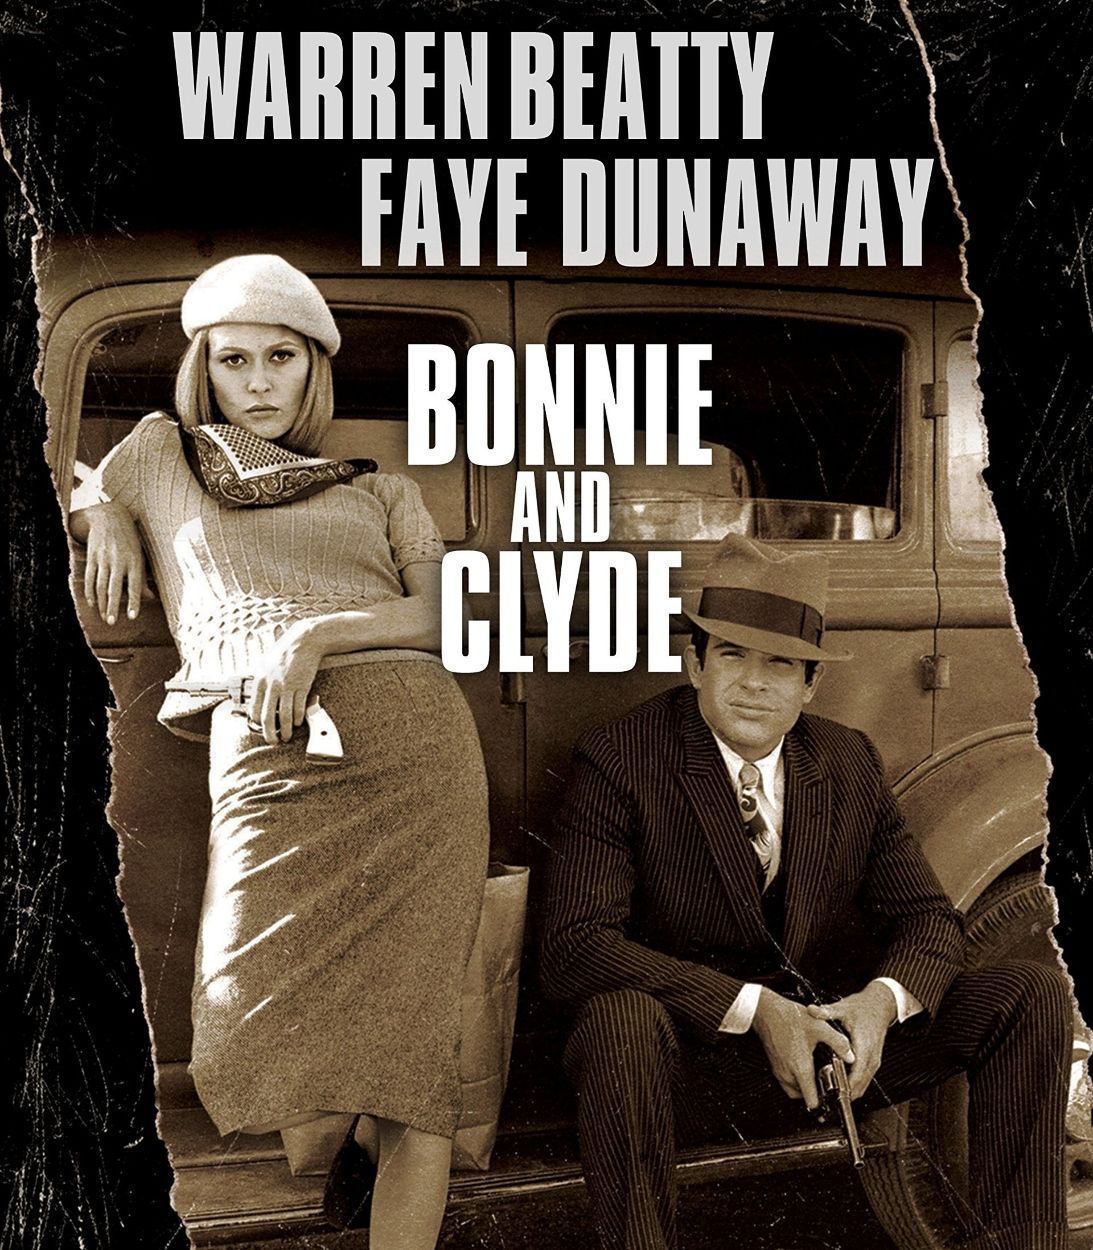 bonnie and clyde poster TLDR vertical